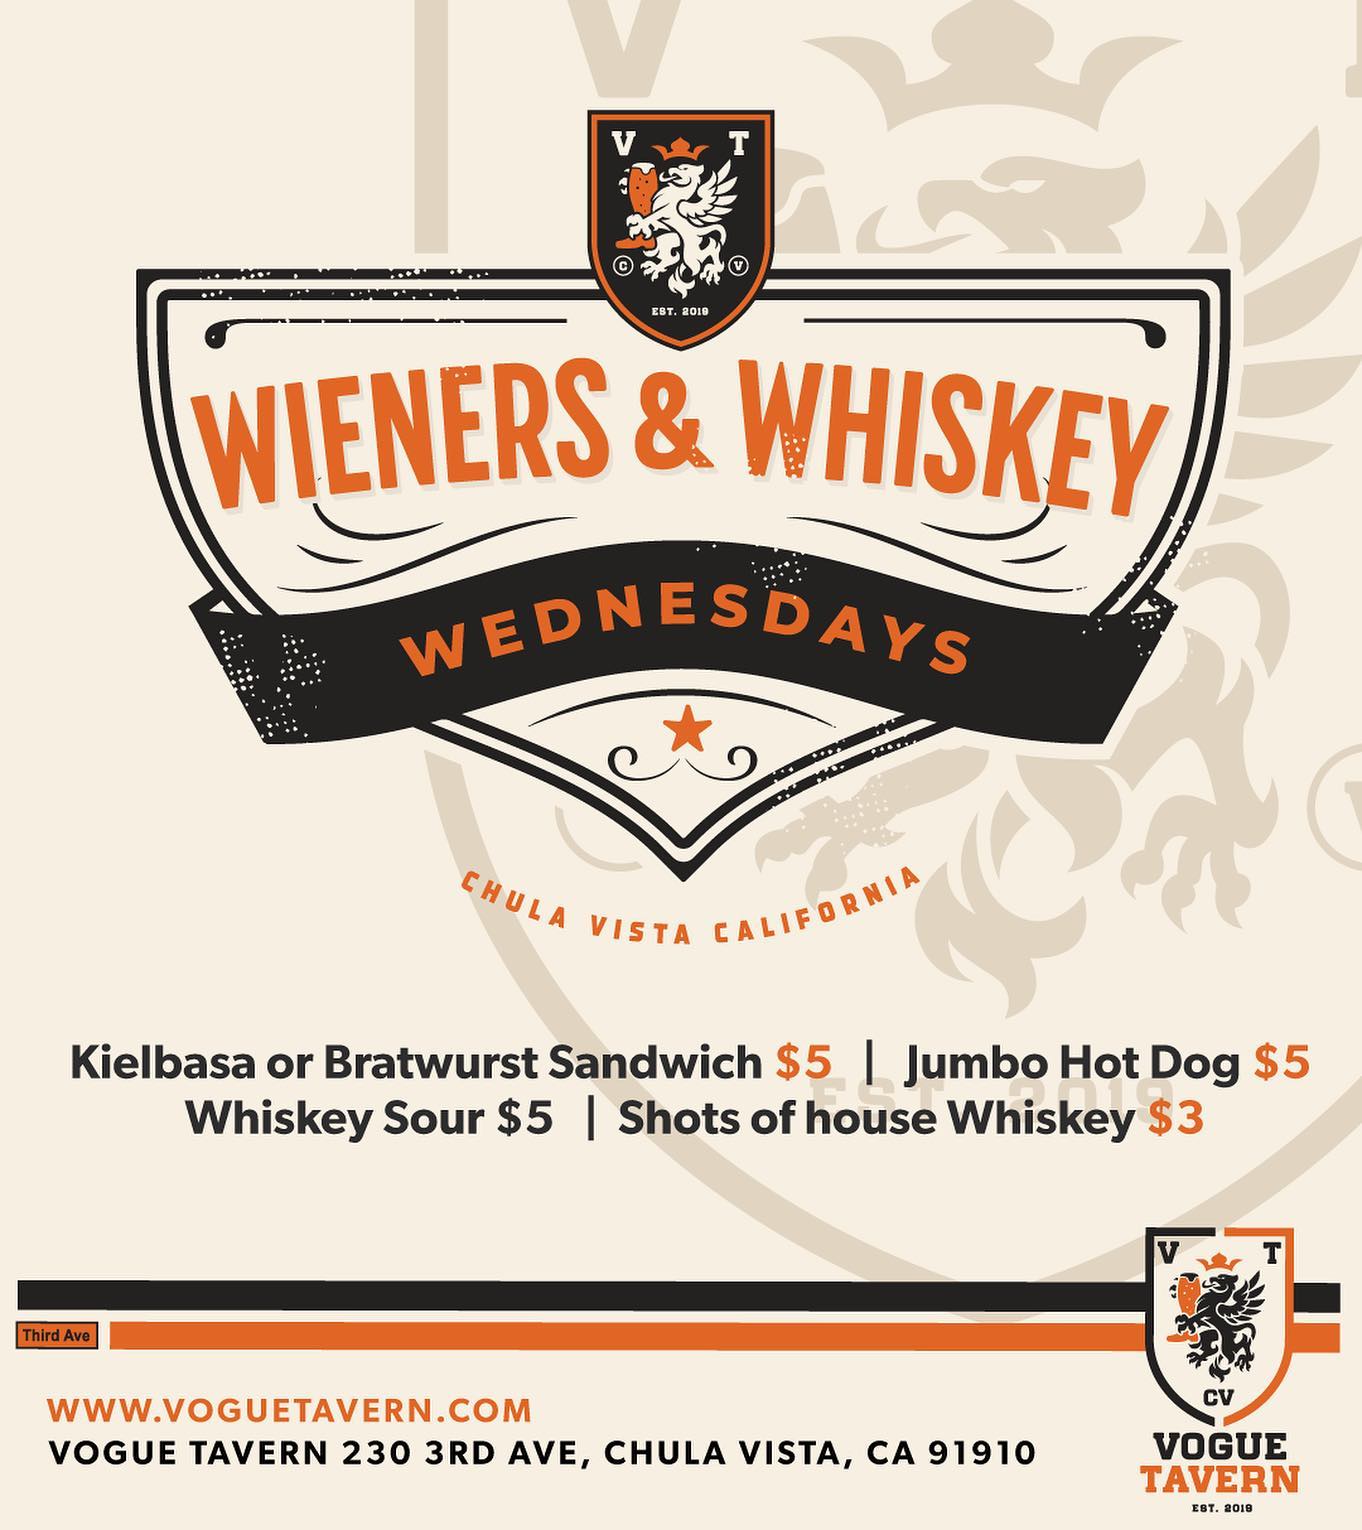 Weiners and Whiskey Wednesdays: Food and Drink Specials